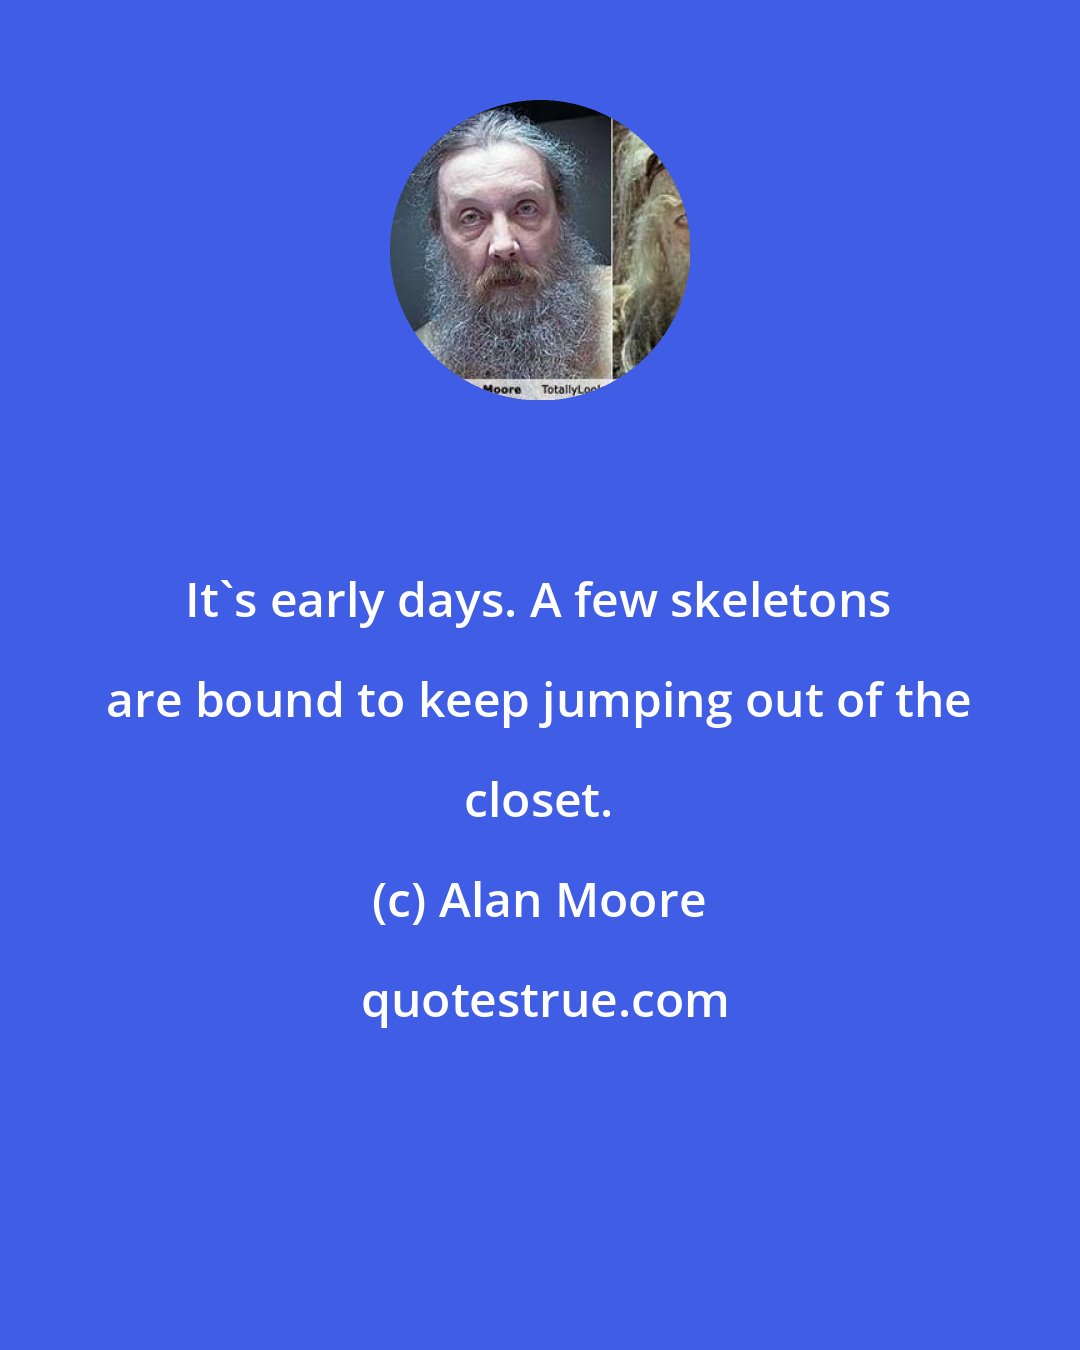 Alan Moore: It's early days. A few skeletons are bound to keep jumping out of the closet.